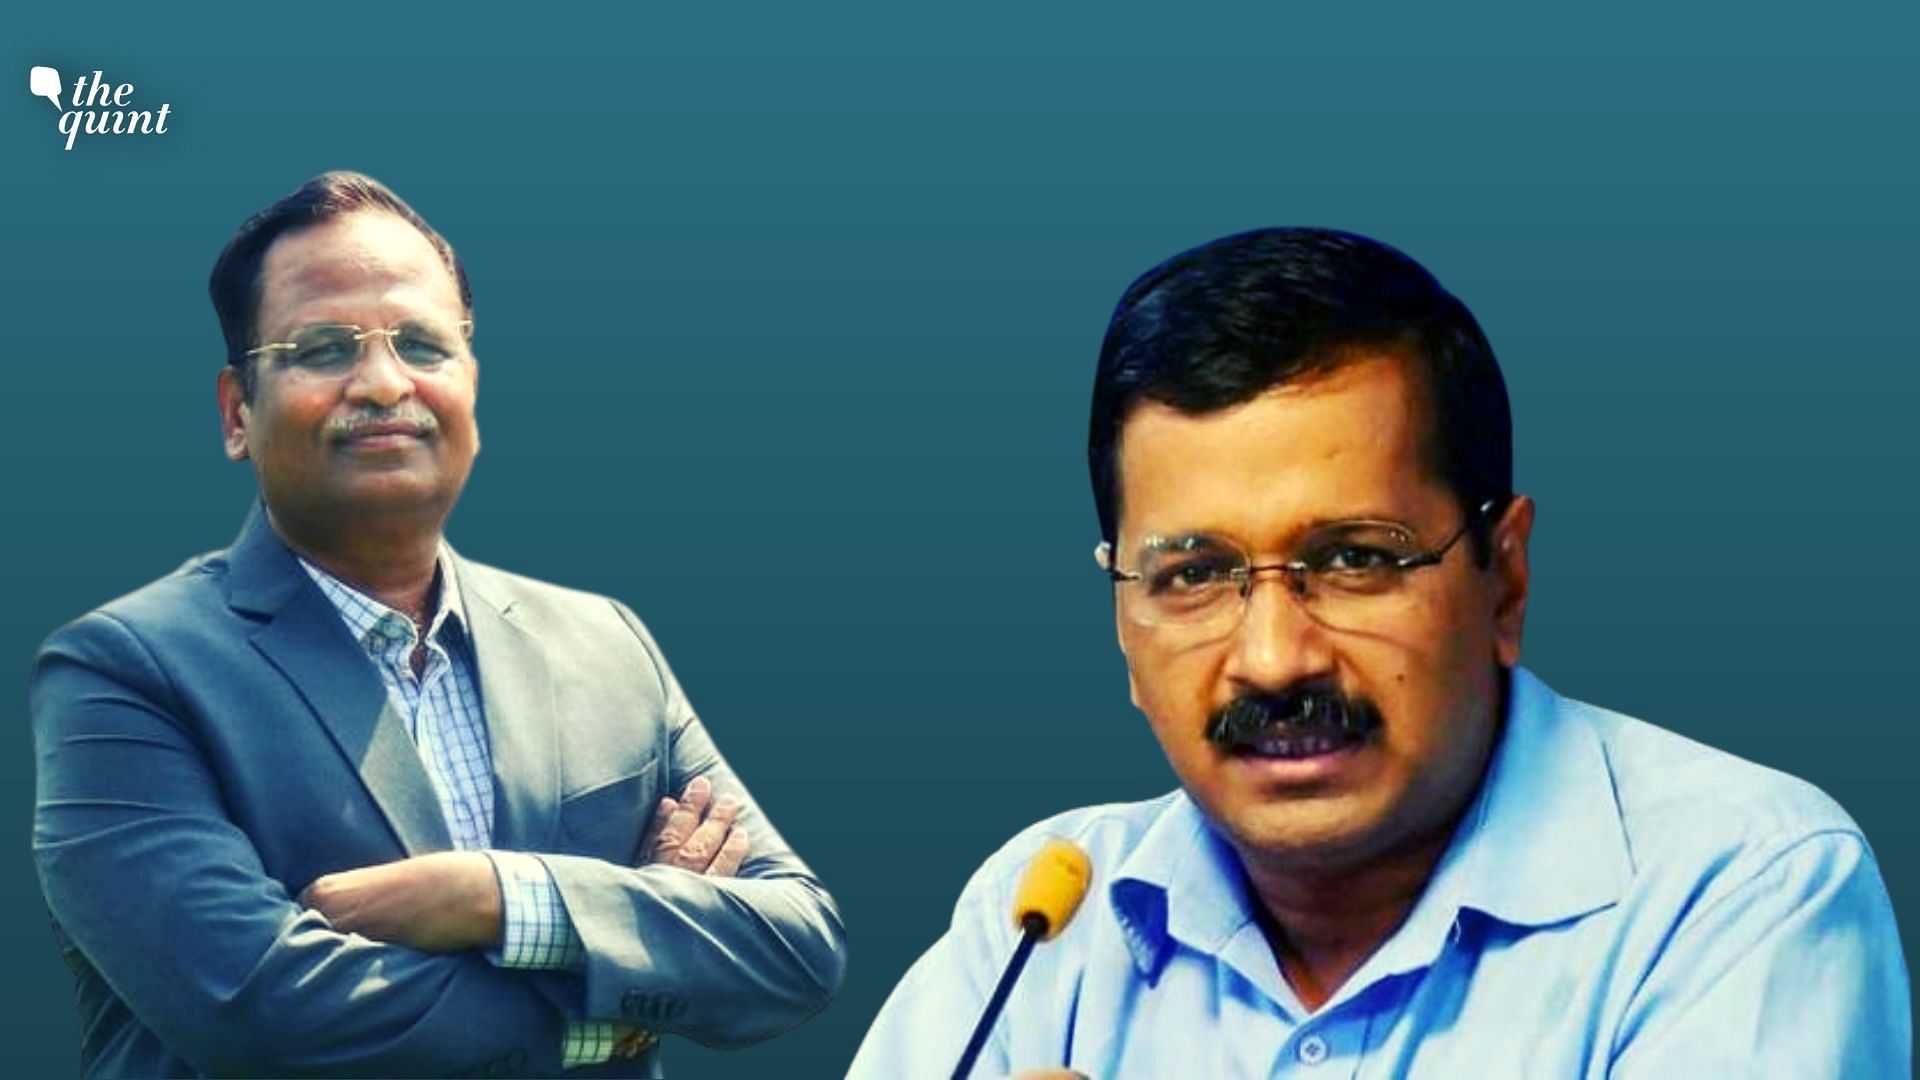 <div class="paragraphs"><p>Delhi Health Minister Satyendar Jain may be arrested by the Enforcement Directorate (ED), ahead of Punjab elections, Delhi Chief Minister and Aam Aadmi Party (AAP) chief Arvind Kejriwal said on Sunday, 23 June. </p></div>